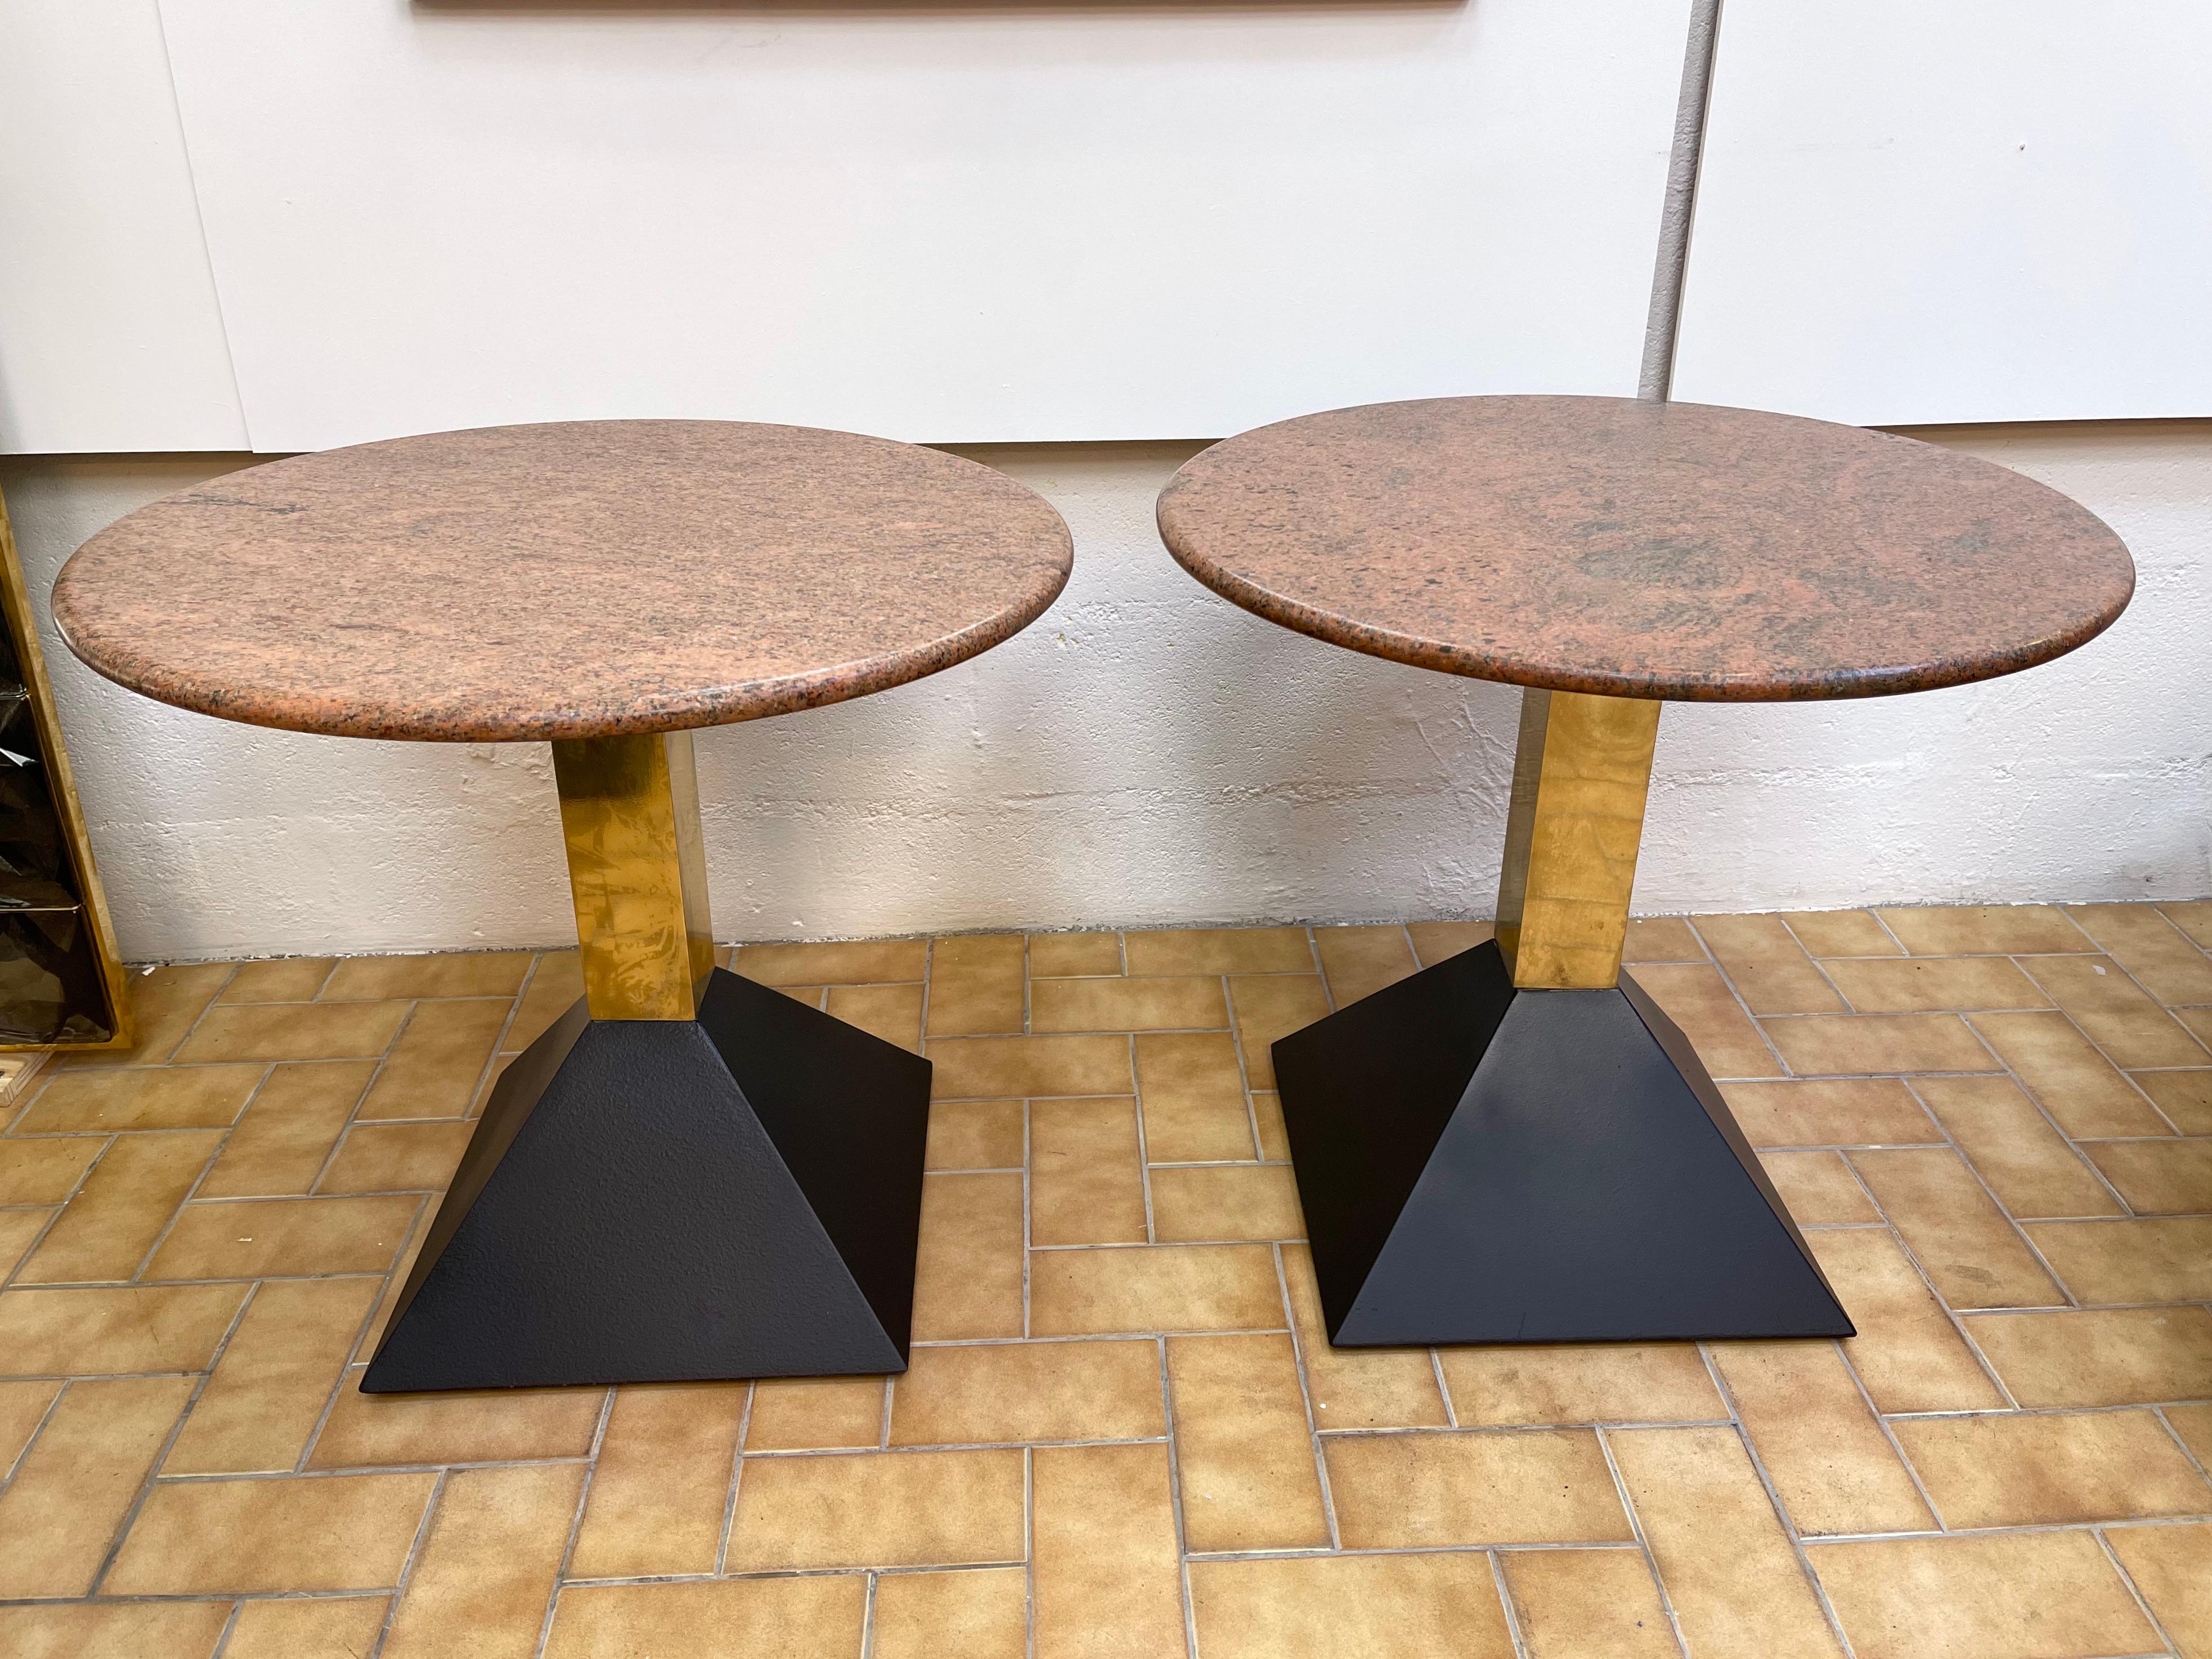 Pair of Red Granite and Brass Side Tables, Italy, 1980s For Sale 4